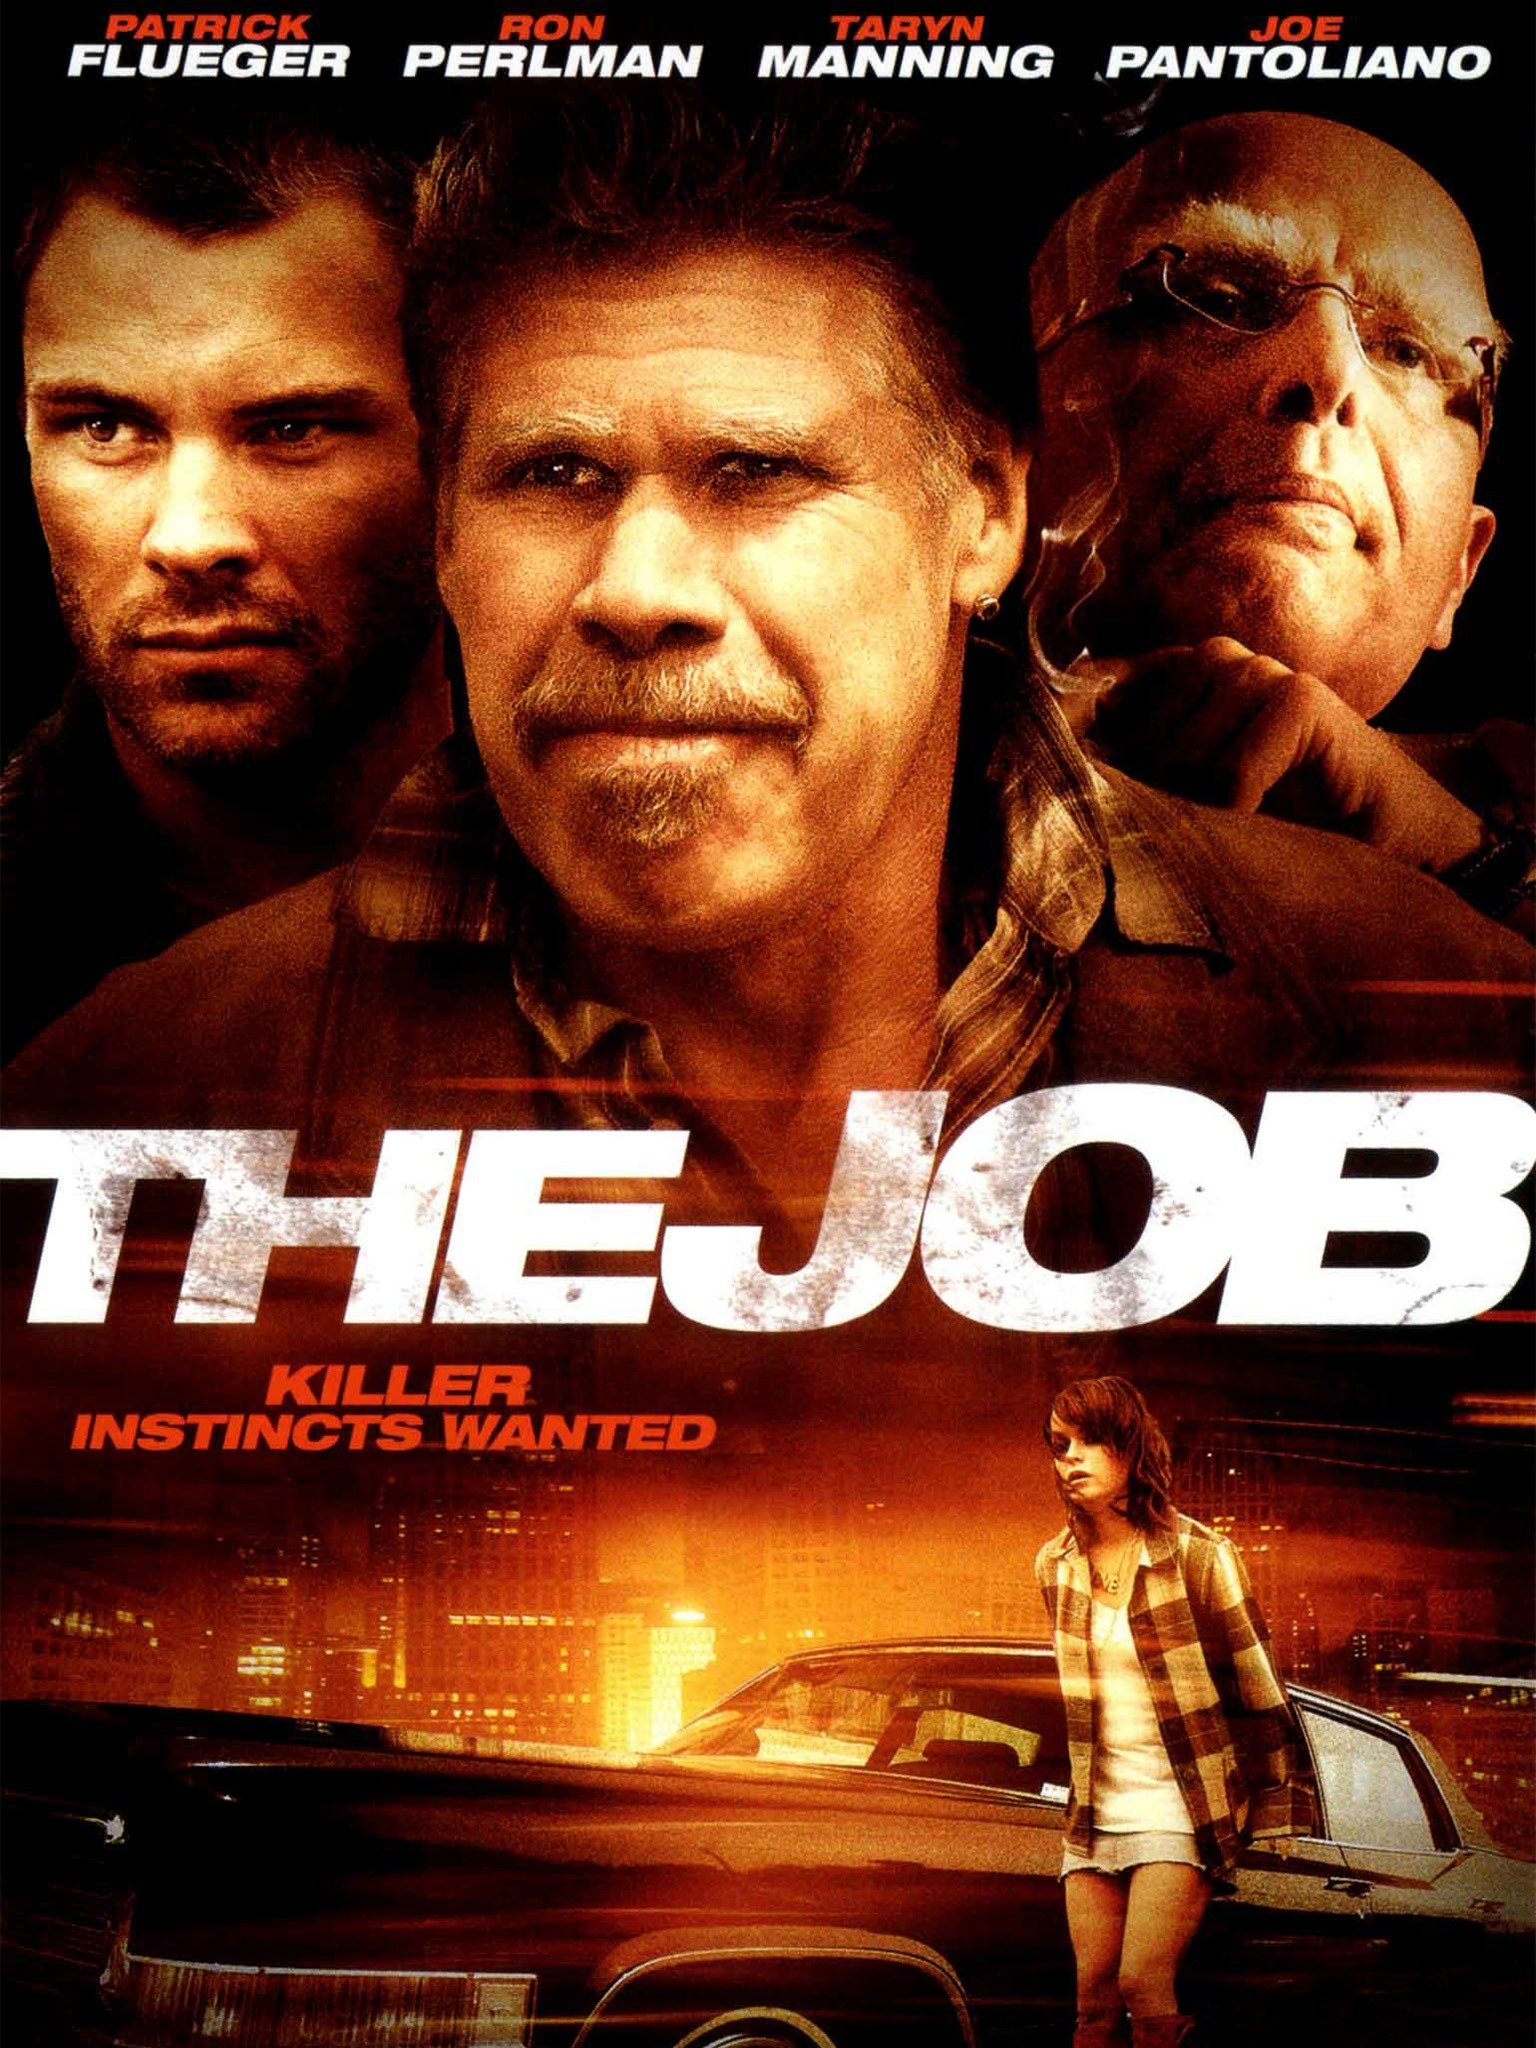 the man for the job movie review